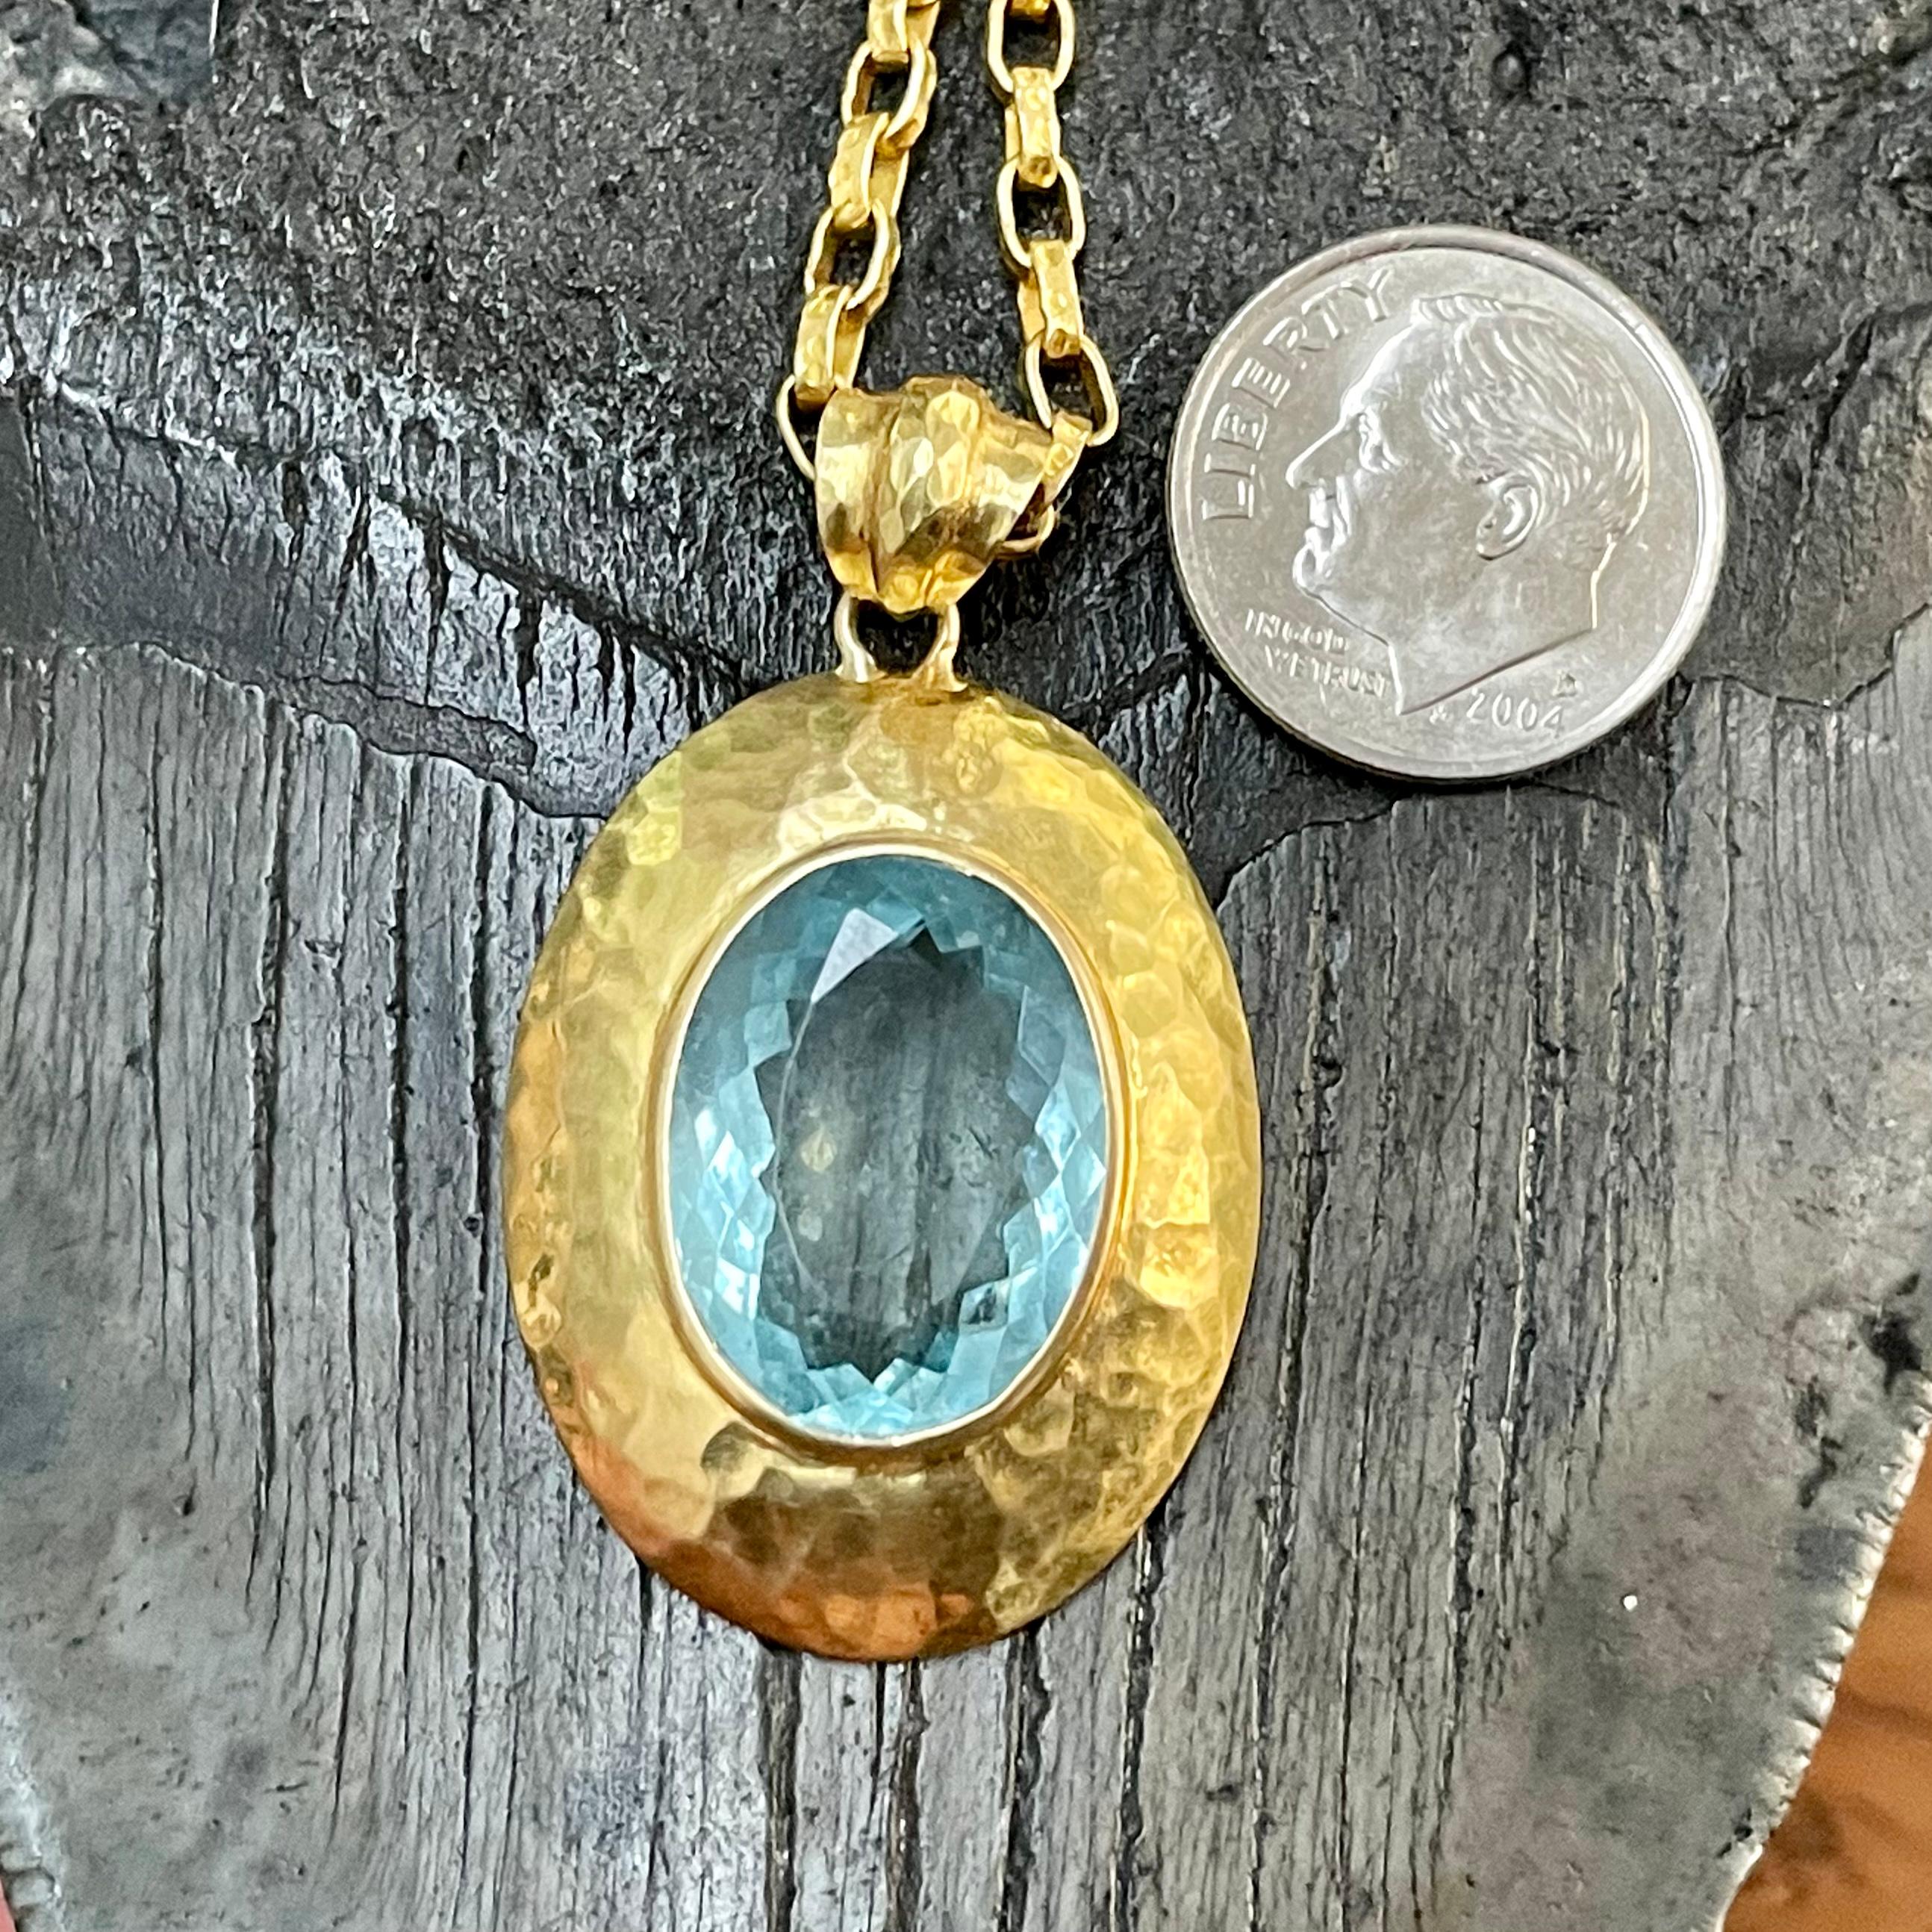 An oval 13 x 18 mm faceted aquamarine is surround in a handmade hammered oval surrounding domed setting with similar hammered bail above. A simple yet attractive complement to the stone.  The 18k handmade hammered chain shown is not included but can